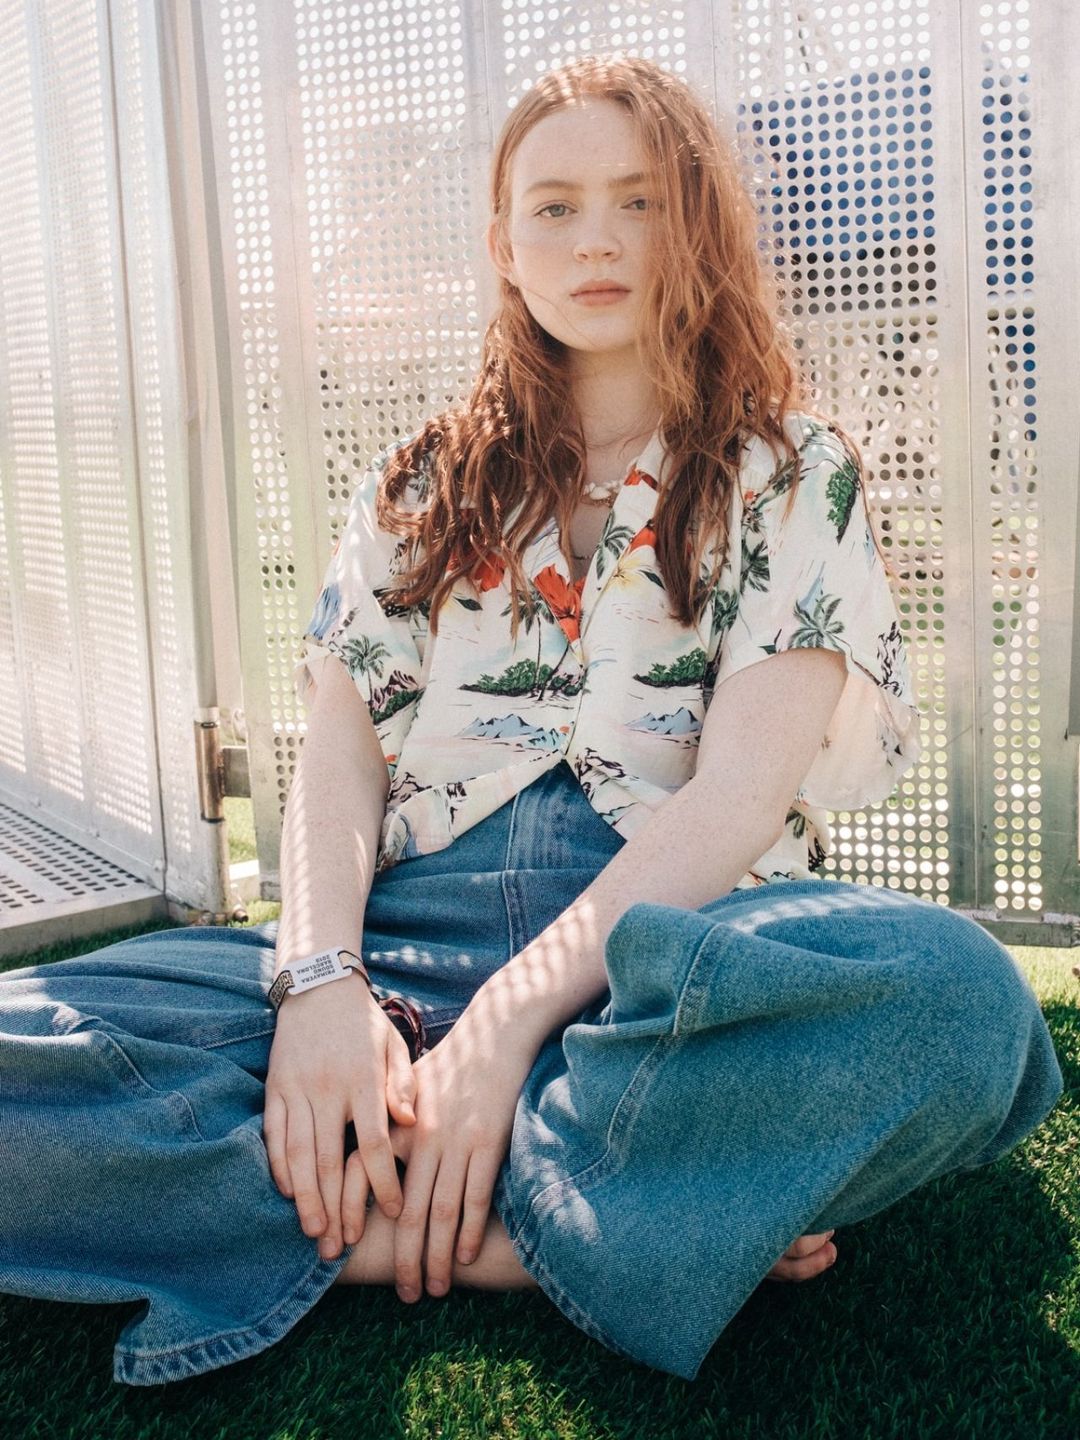 Sadie Sink unphotoshopped pictures